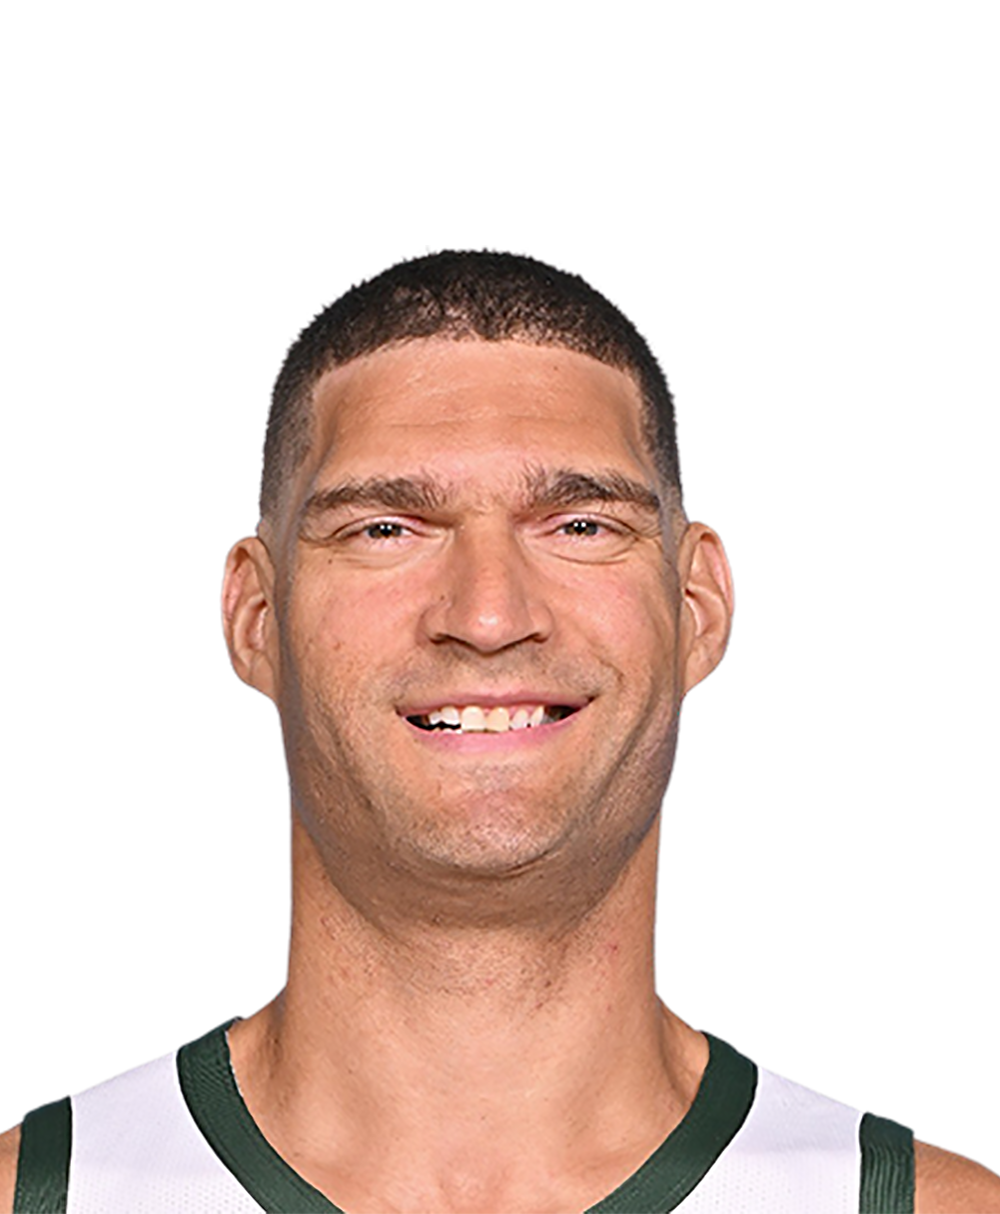 Brook Lopez returns from injury, provides shot blocking for playoffs